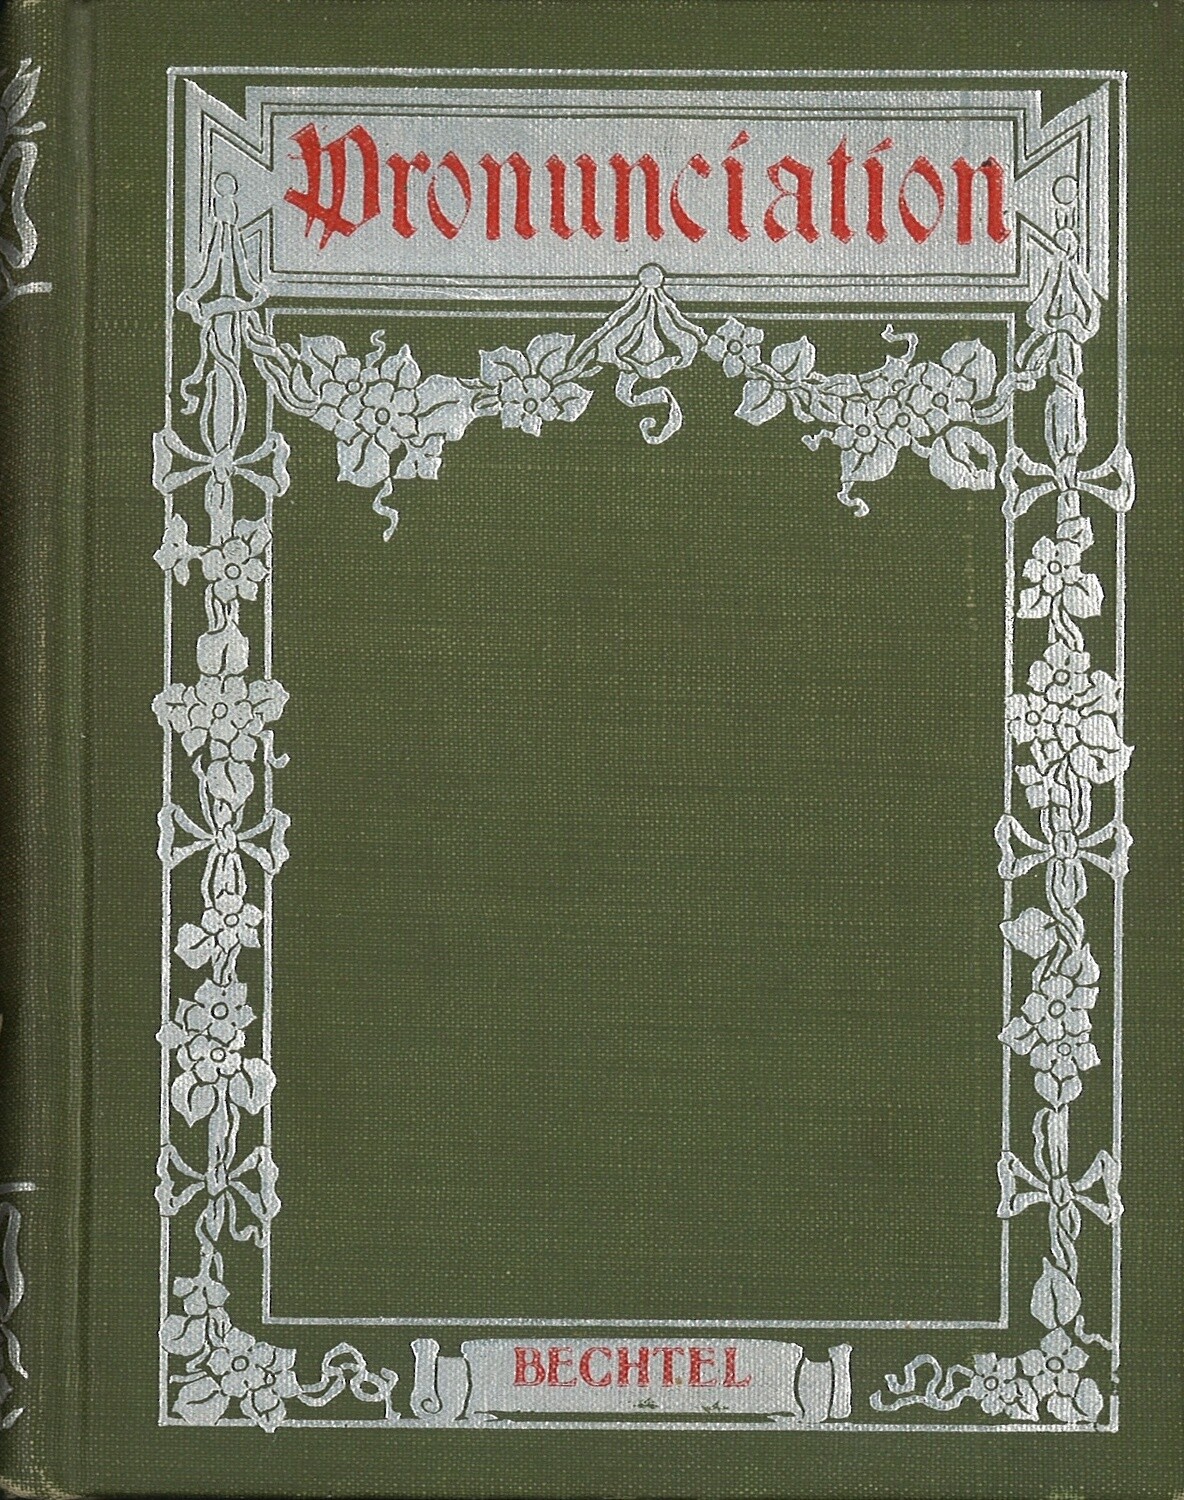 Hand-Book of Pronounciation and Phonetic Analysis by John H. Bechtel